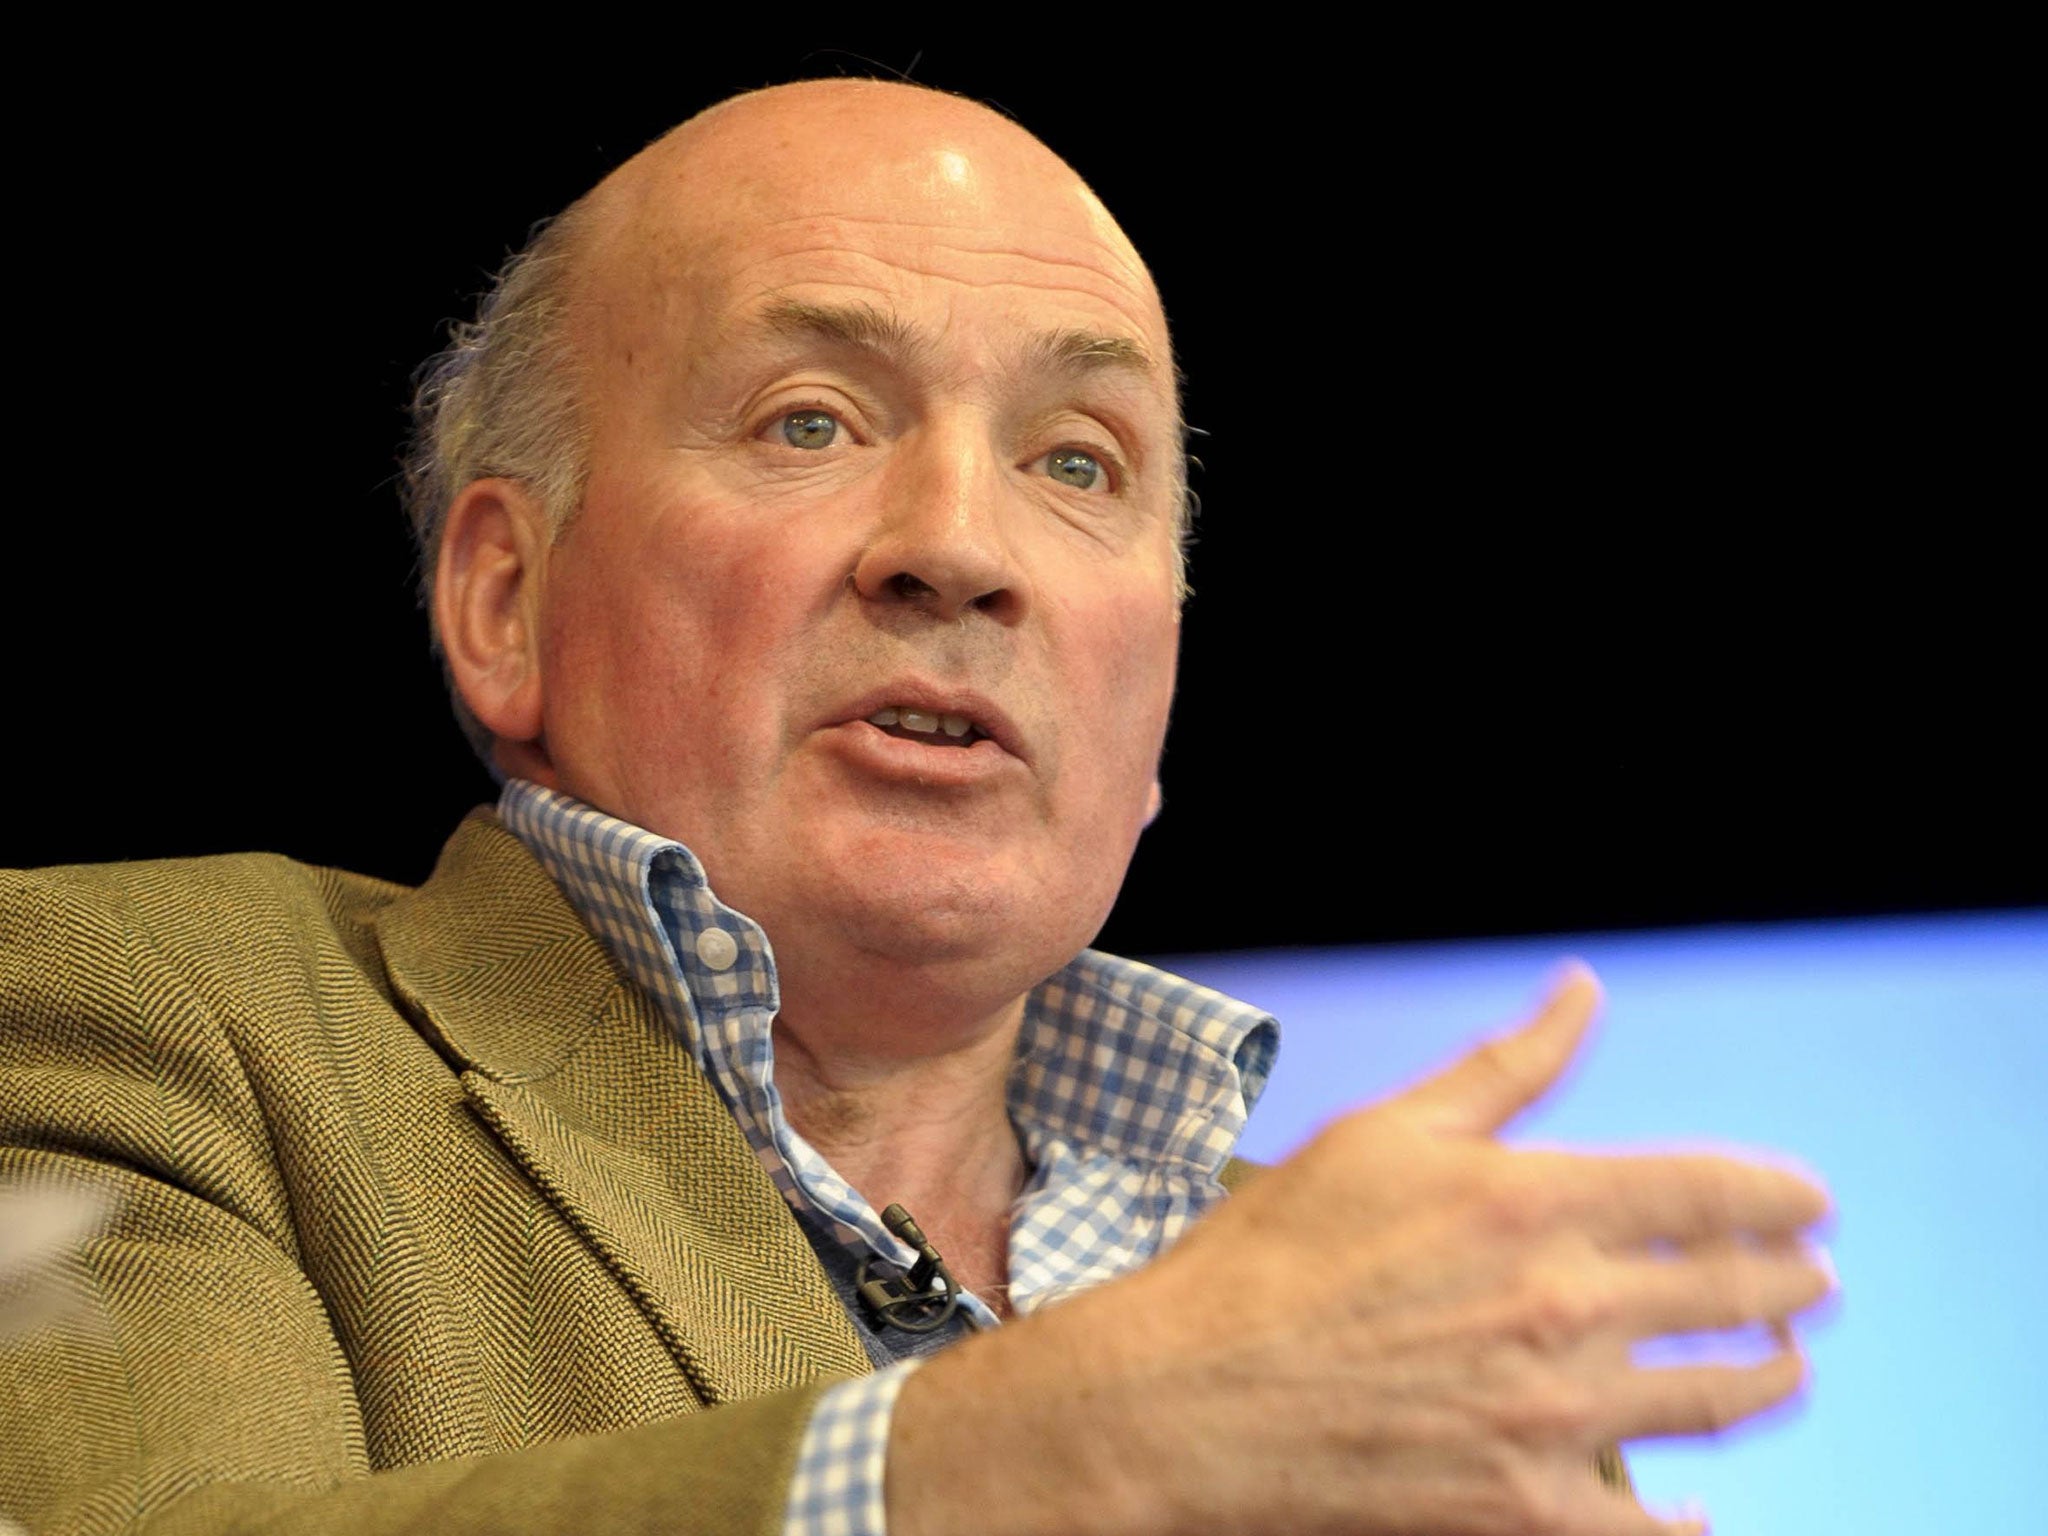 Lord Dannatt, former head of the Army, says we must think the unthinkable